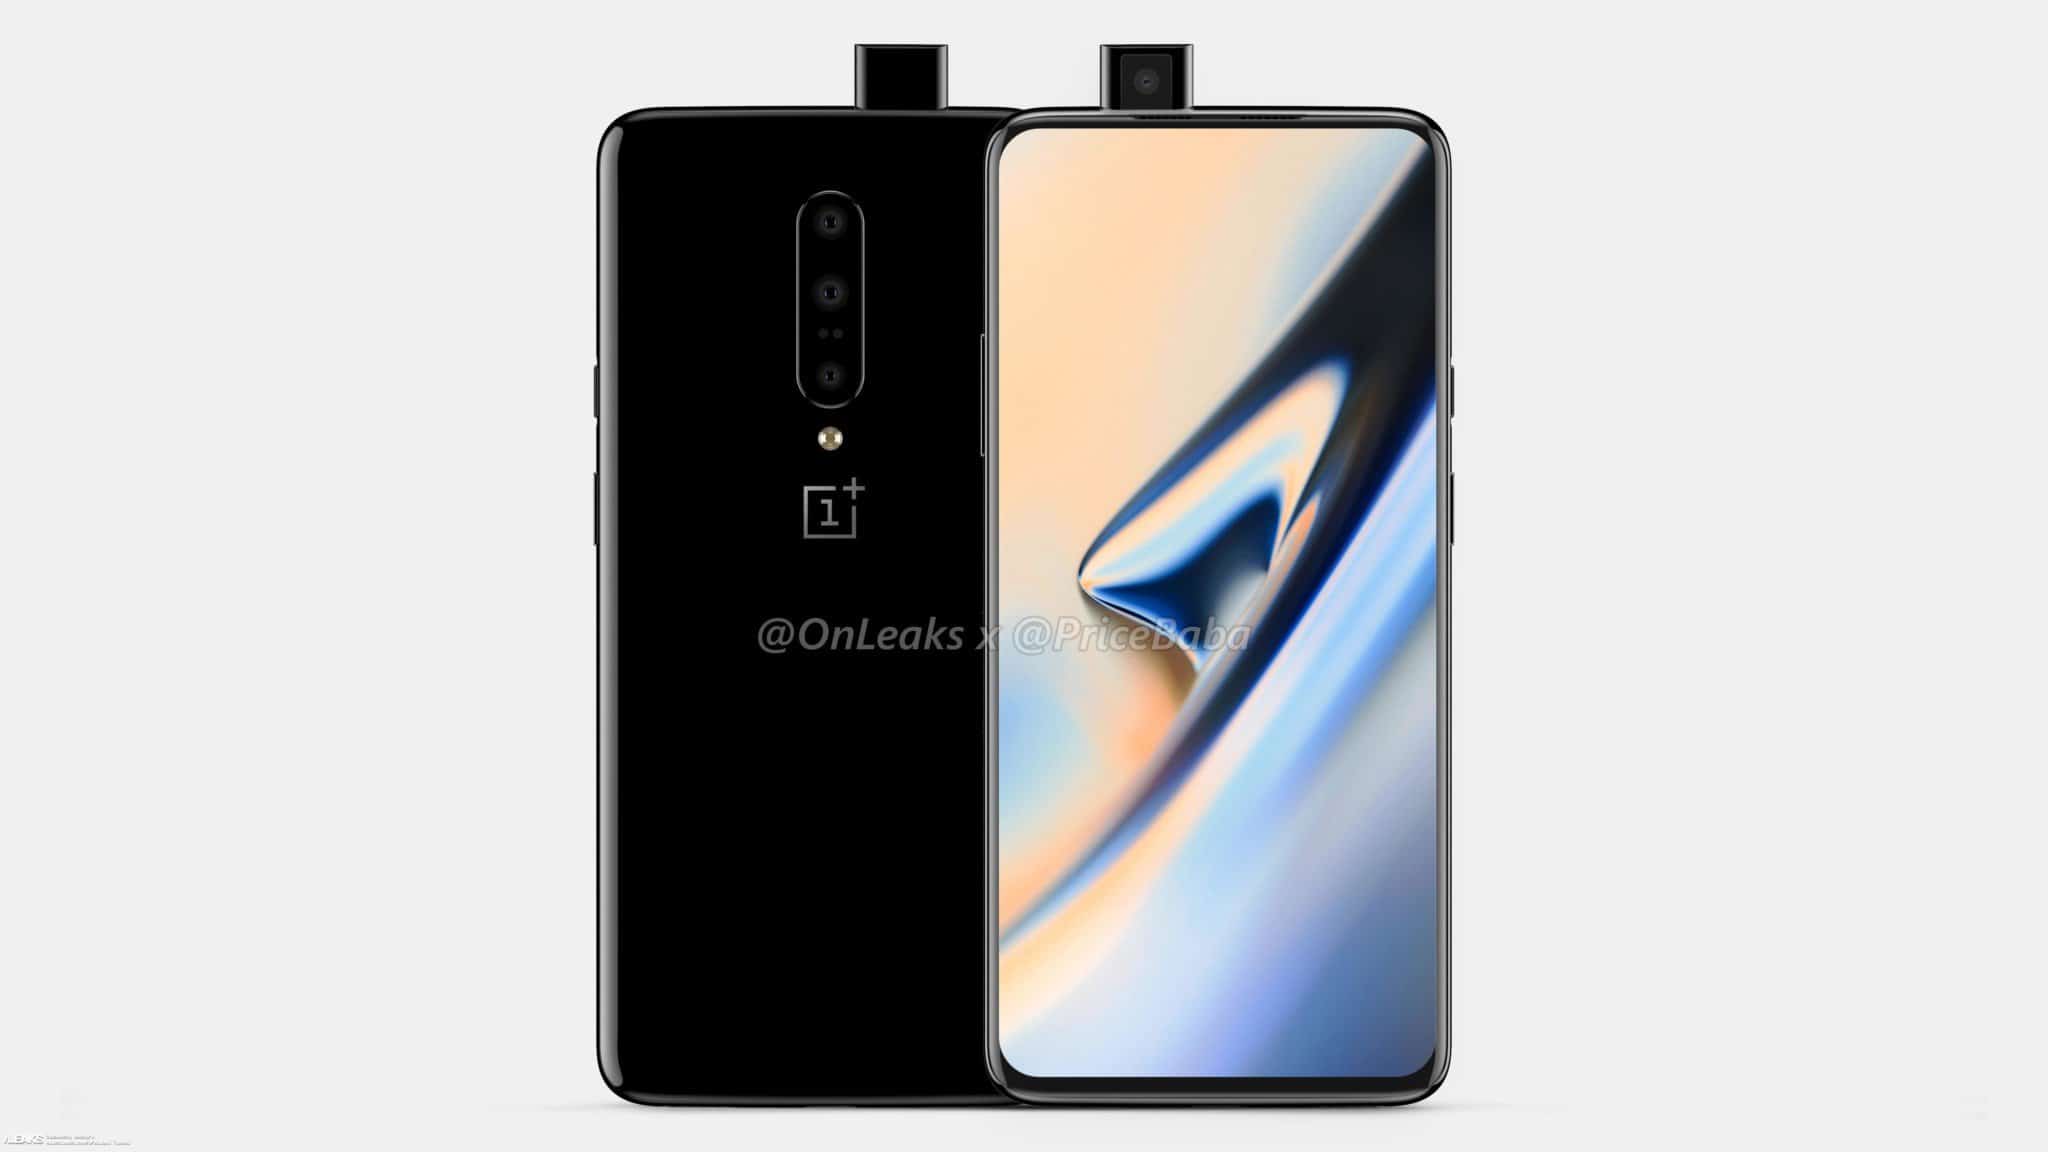 Oneplus 7 hands-on flowed out image displays pop-up front image sensor and a notch-less panel